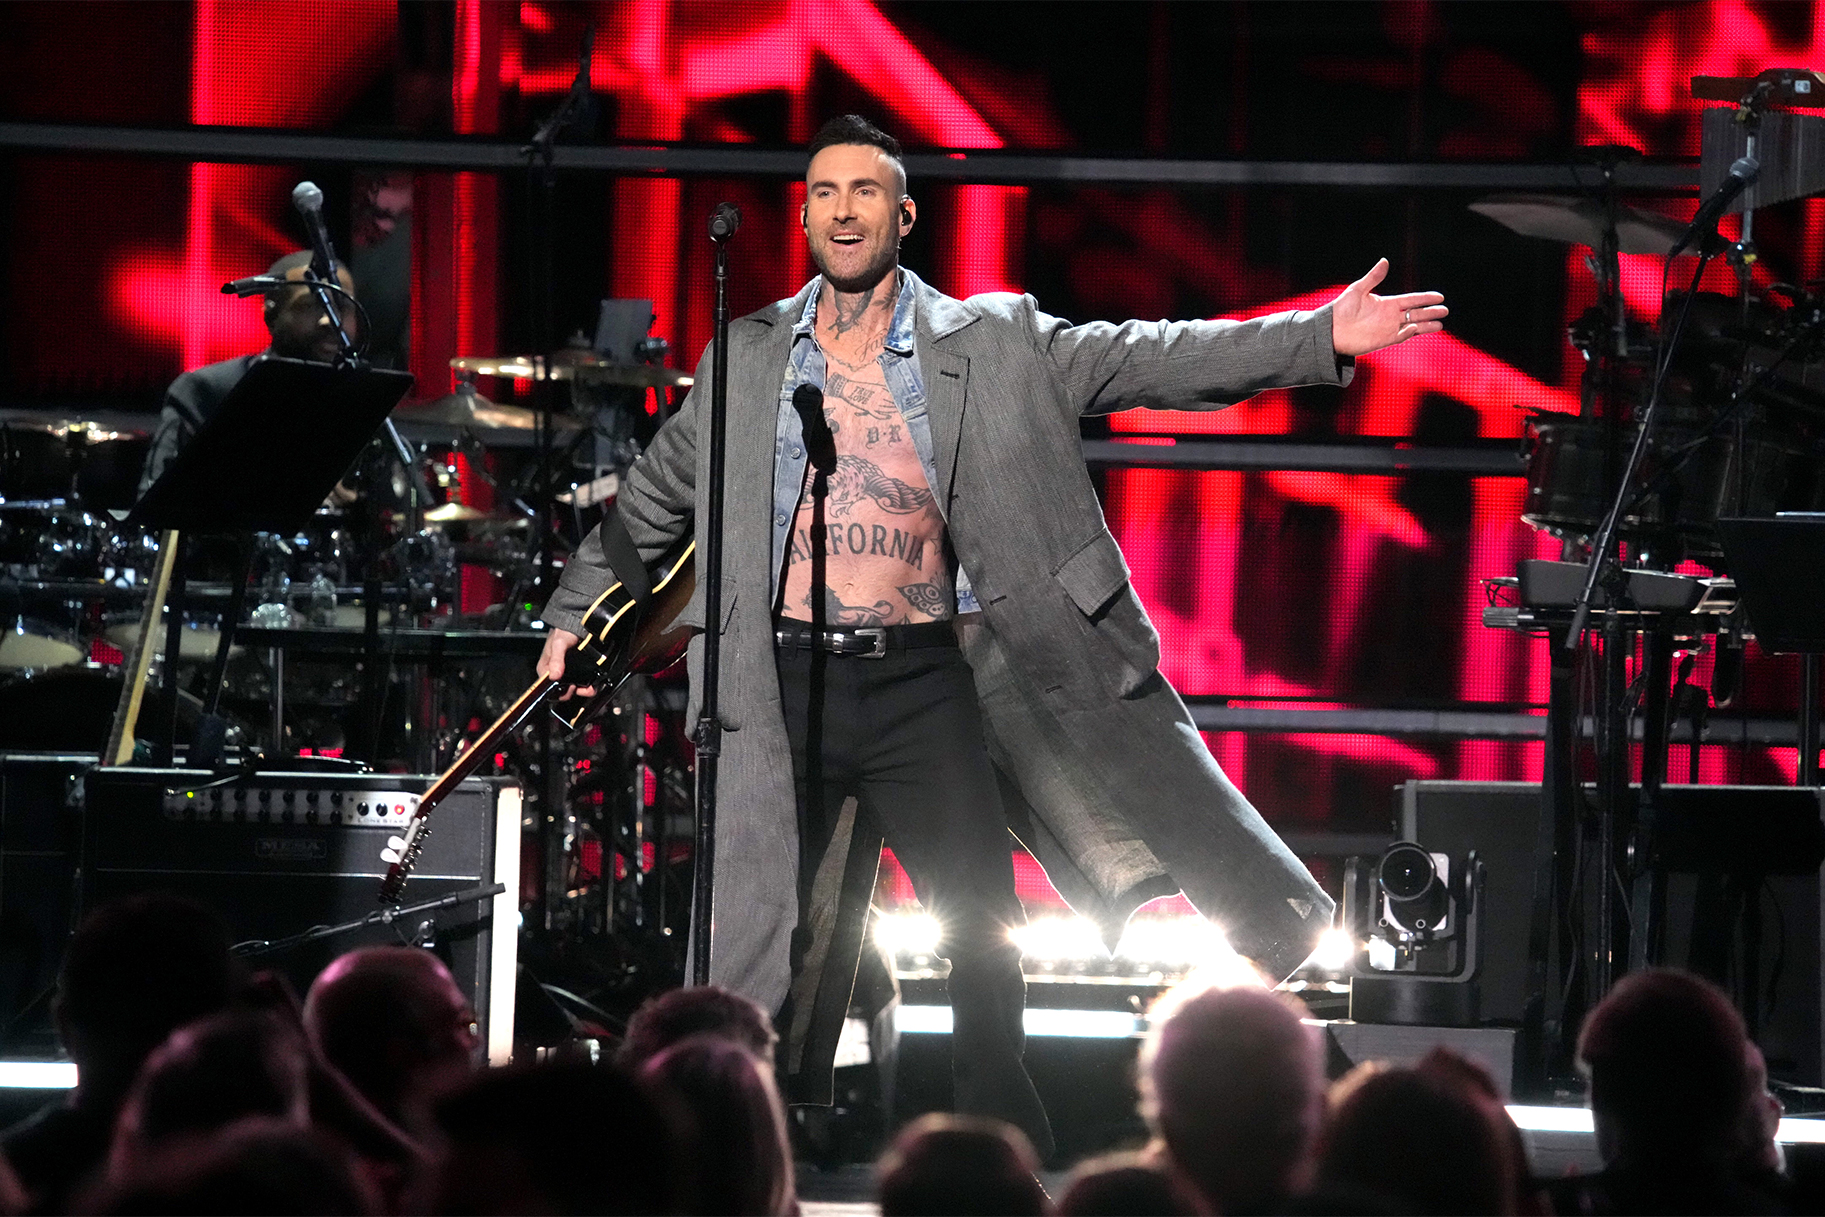 Adam Levine’s shirtless workout videos show off his tattoos